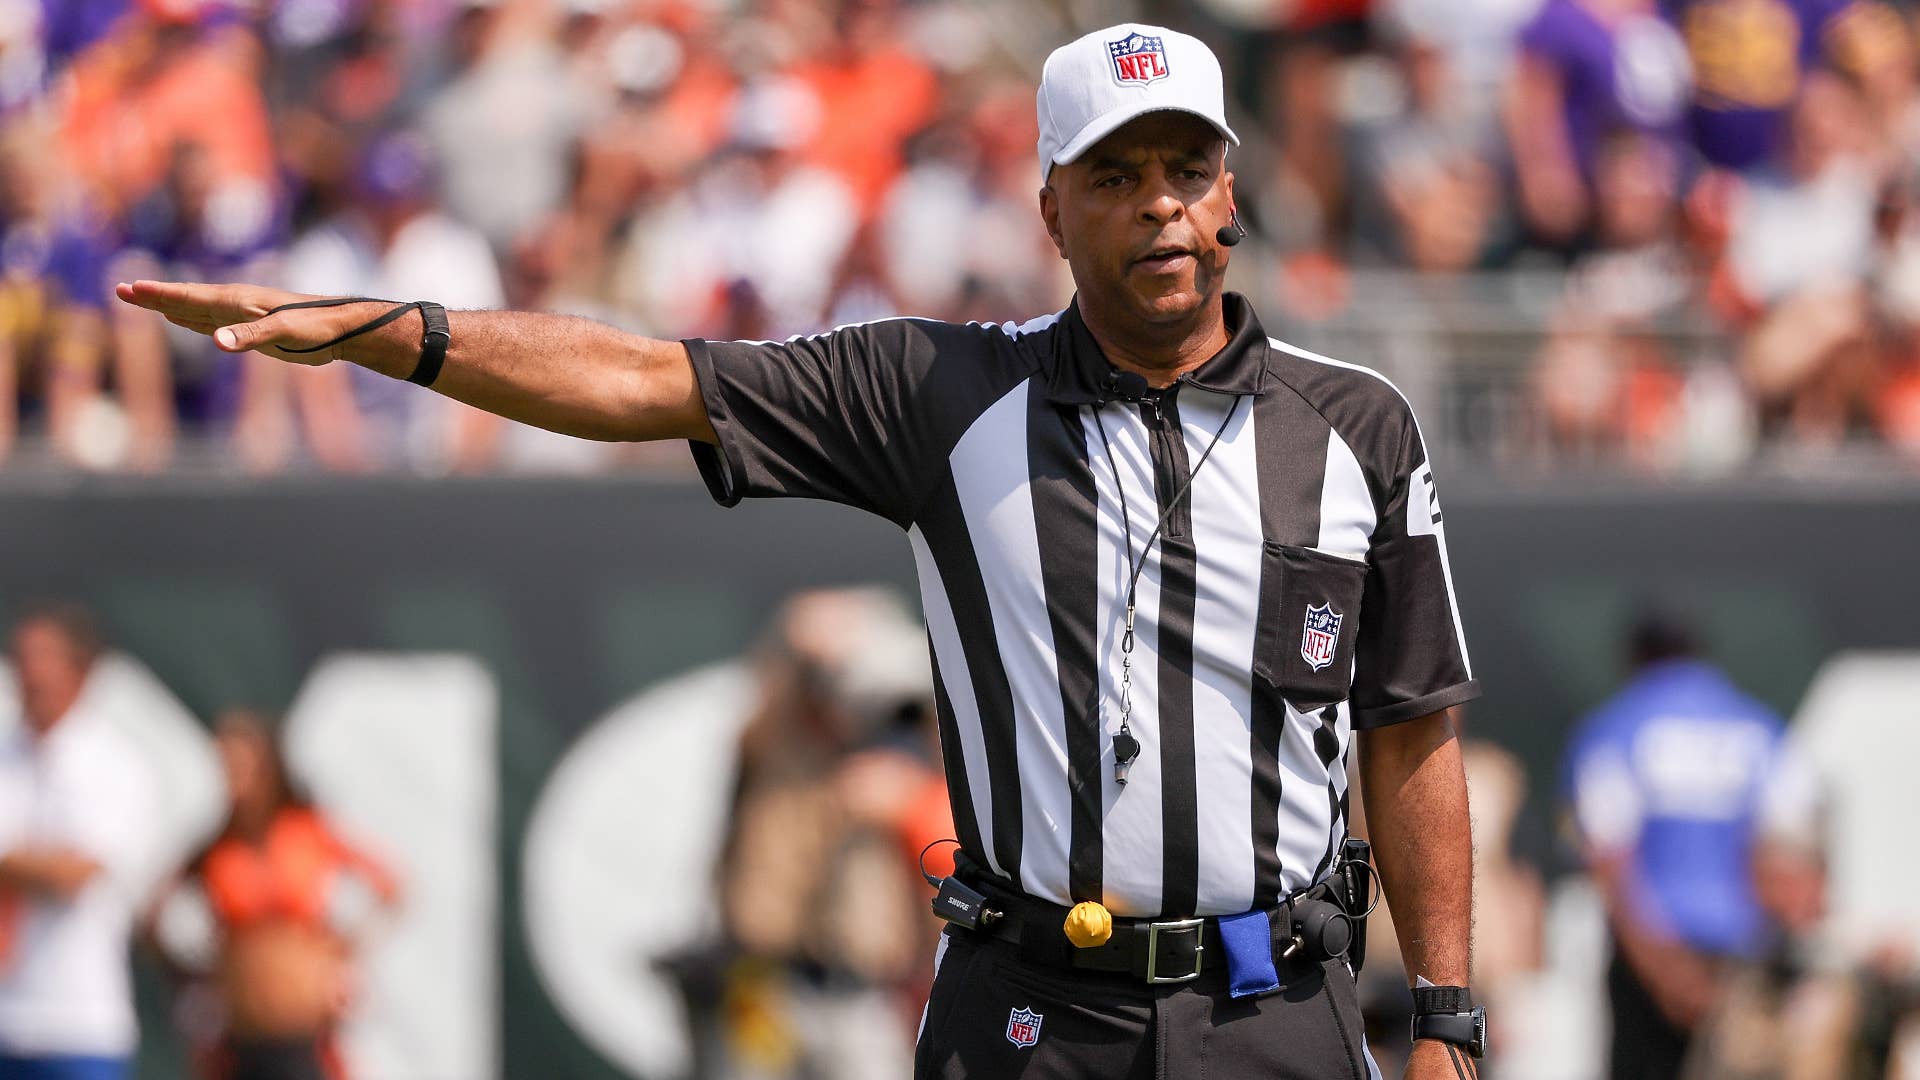 Referee Adrian Hill announces a penalty in the first quarter during the game between the Minnesota Vikings and Cincinnati Bengals.